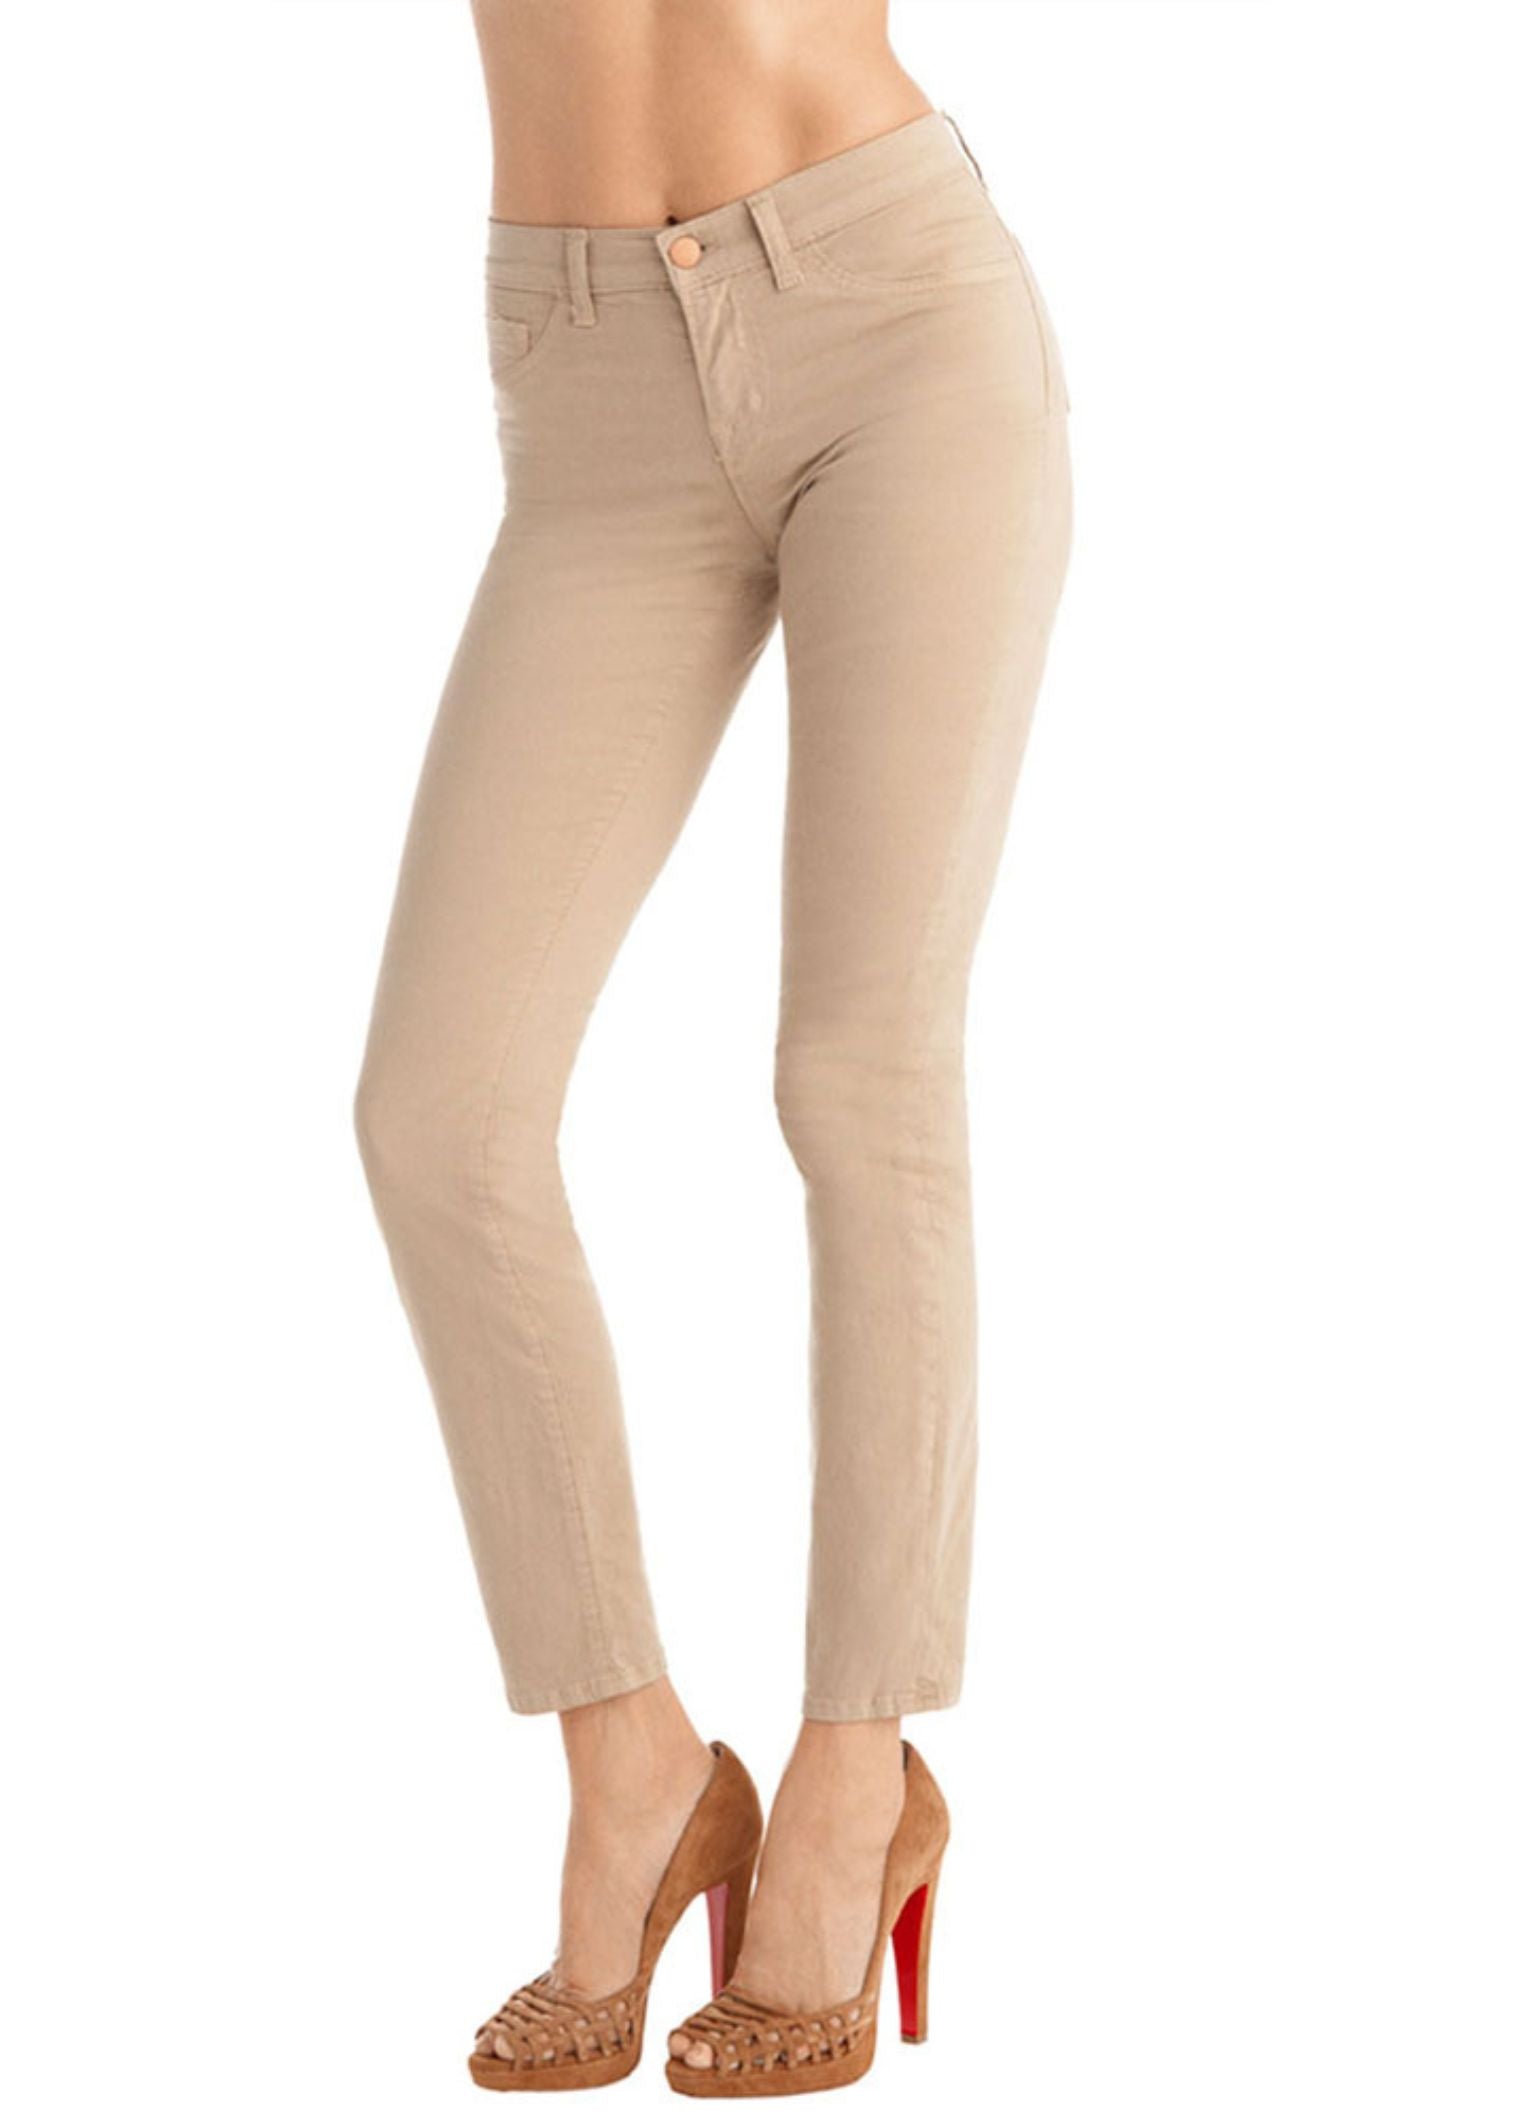 J Brand Mid Rise Skinny Jeans - Second Chance